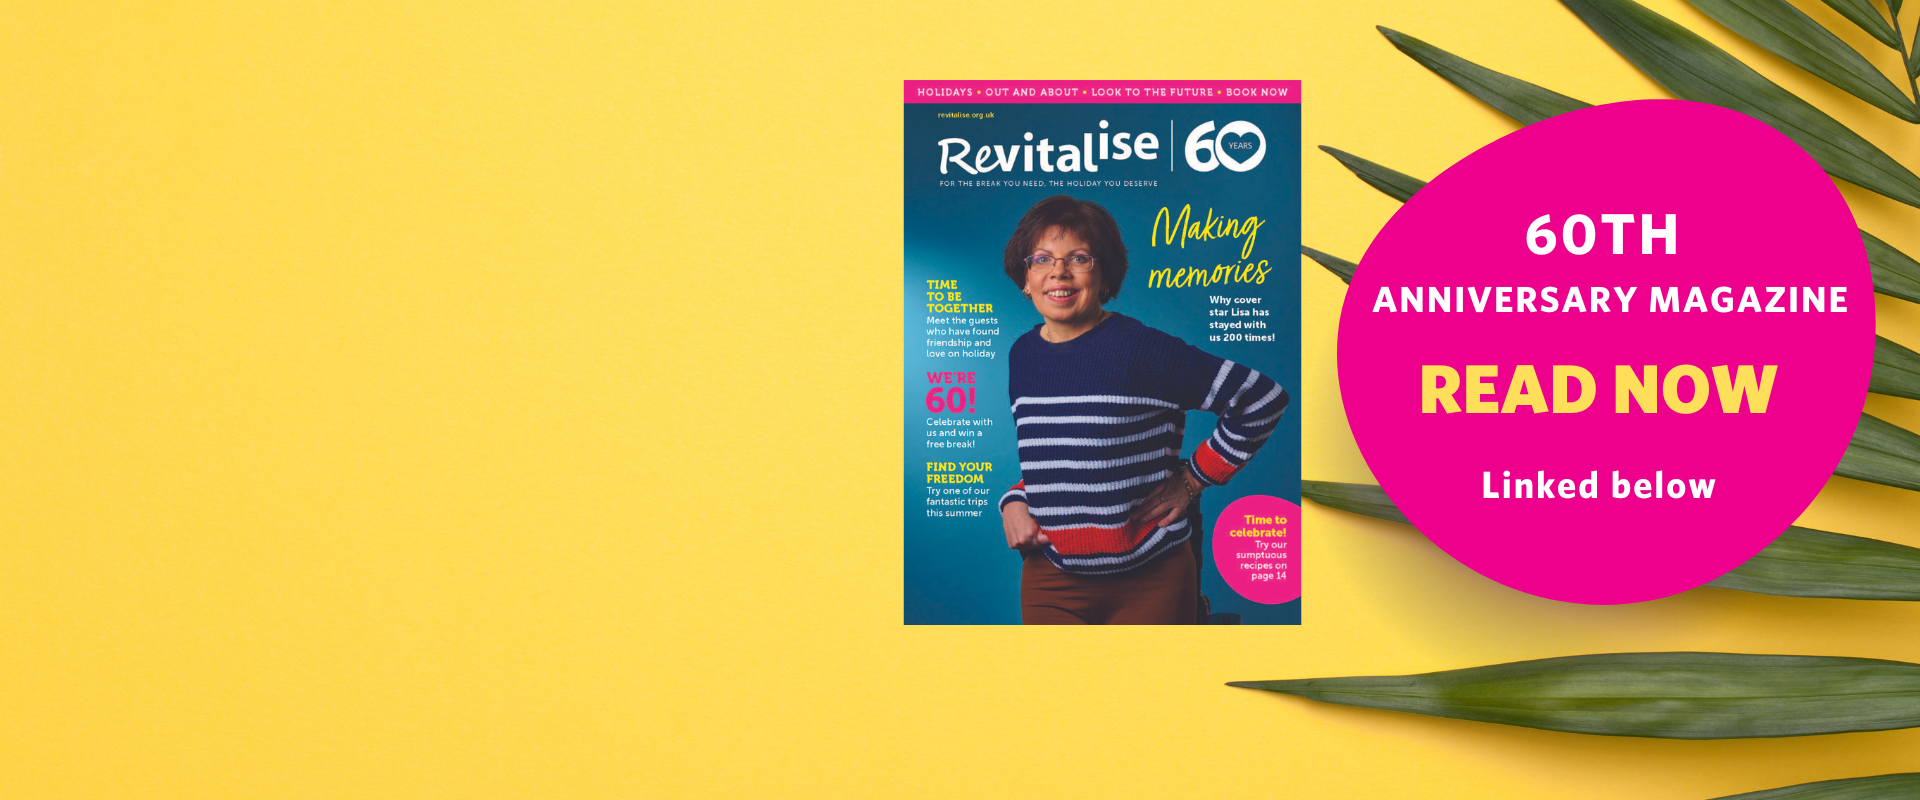 Bright yellow background with Revitalise 60th magazine cover overlaid alongside a pink circle with text reading 60th Anniversary Magazine, Read Now, Linked Below